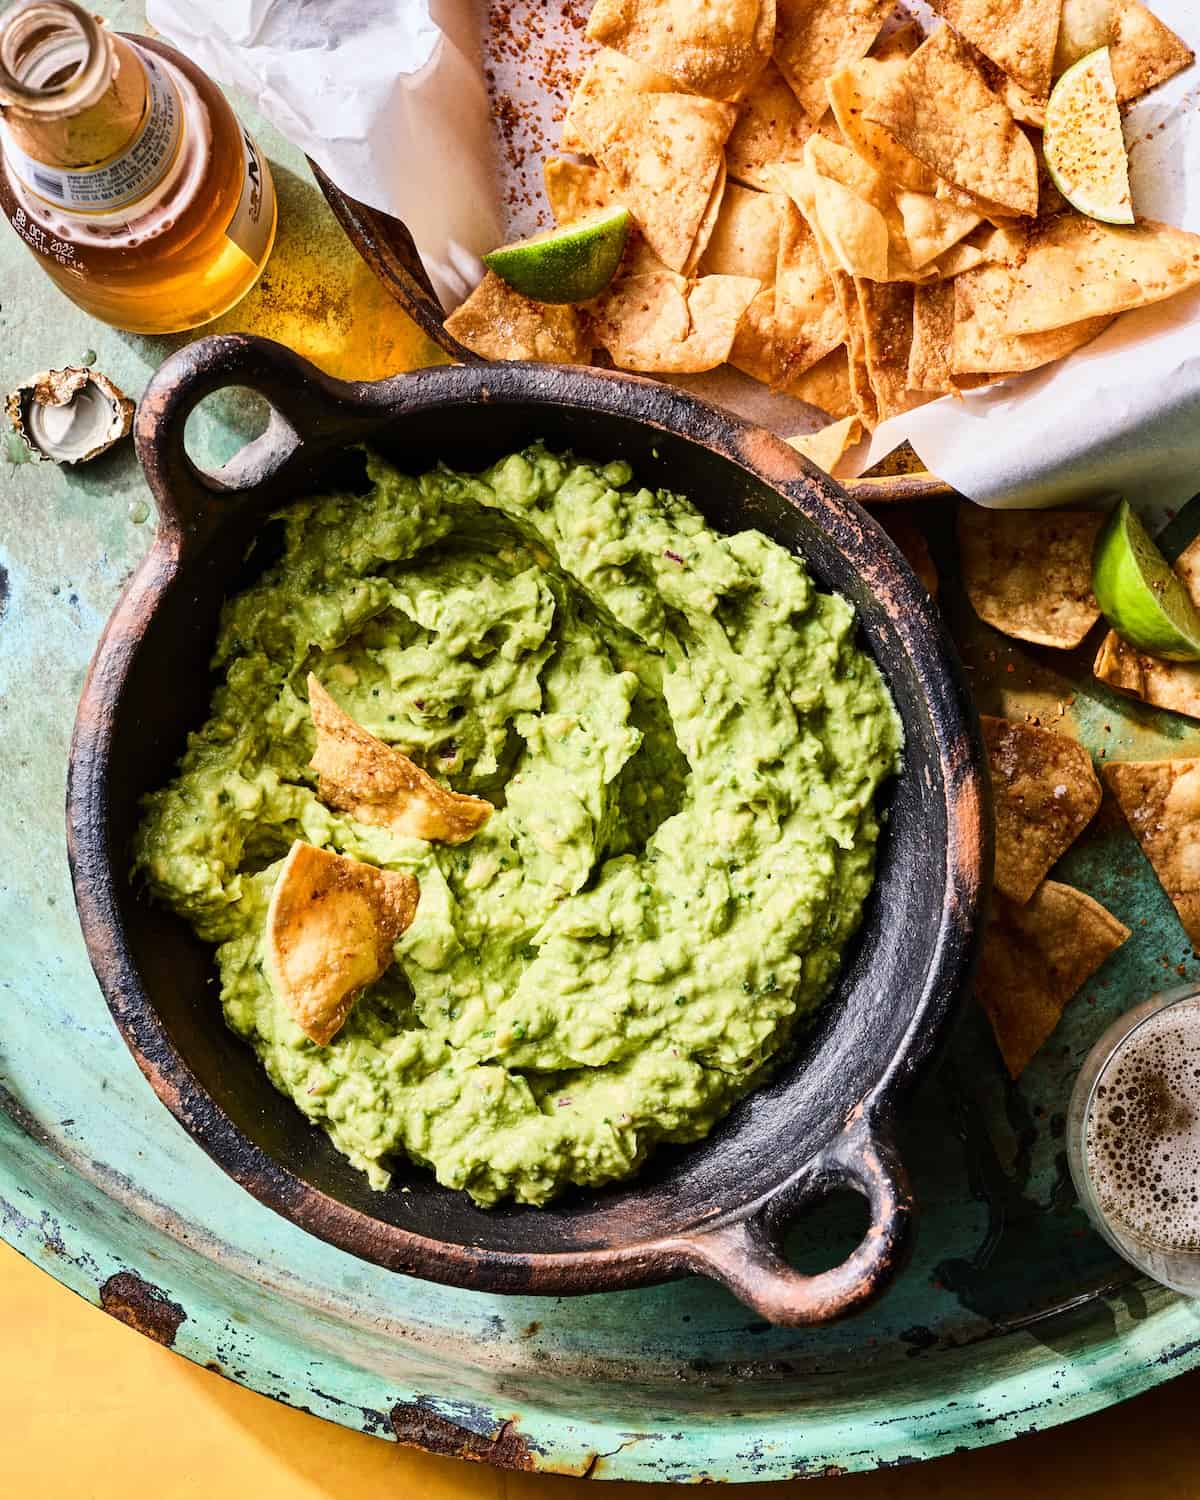 Homemade guacamole with freshly fried tortilla chips on a platter